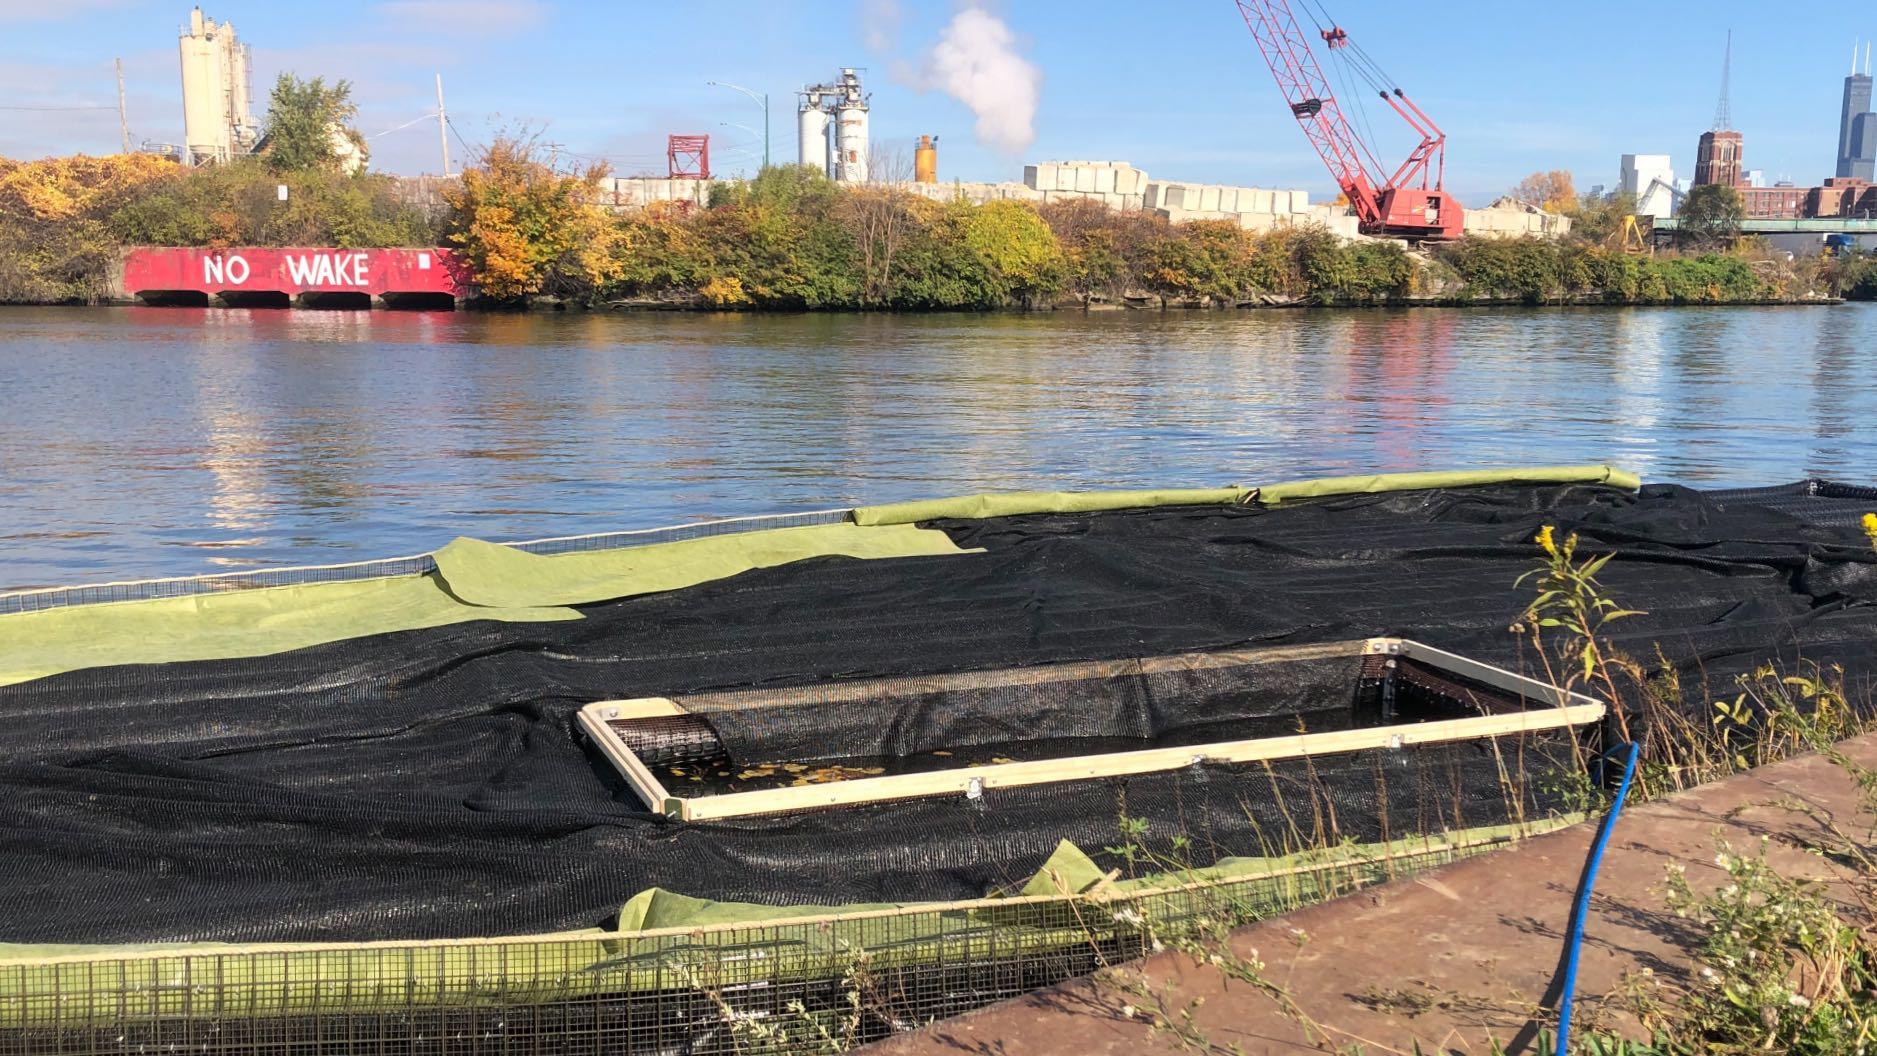 A floating wetland under construction on the South Branch of the Chicago River. Industrial use has stripped the channel of most of its natural vegetation. (Patty Wetli / WTTW News)